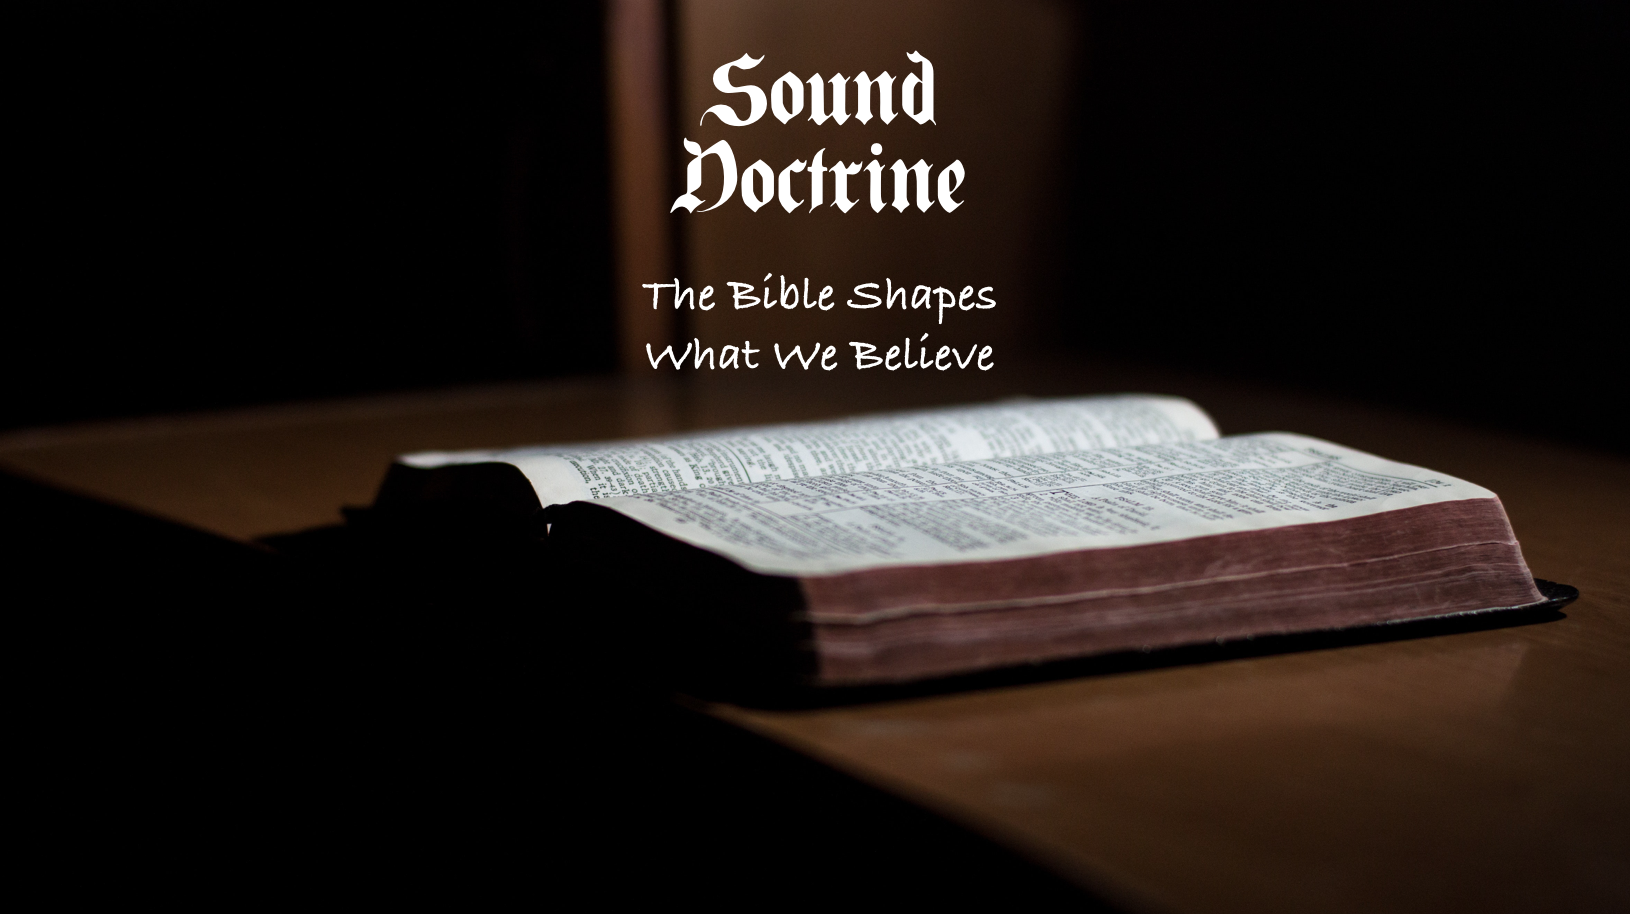 Doctrine: The Lord’s Day